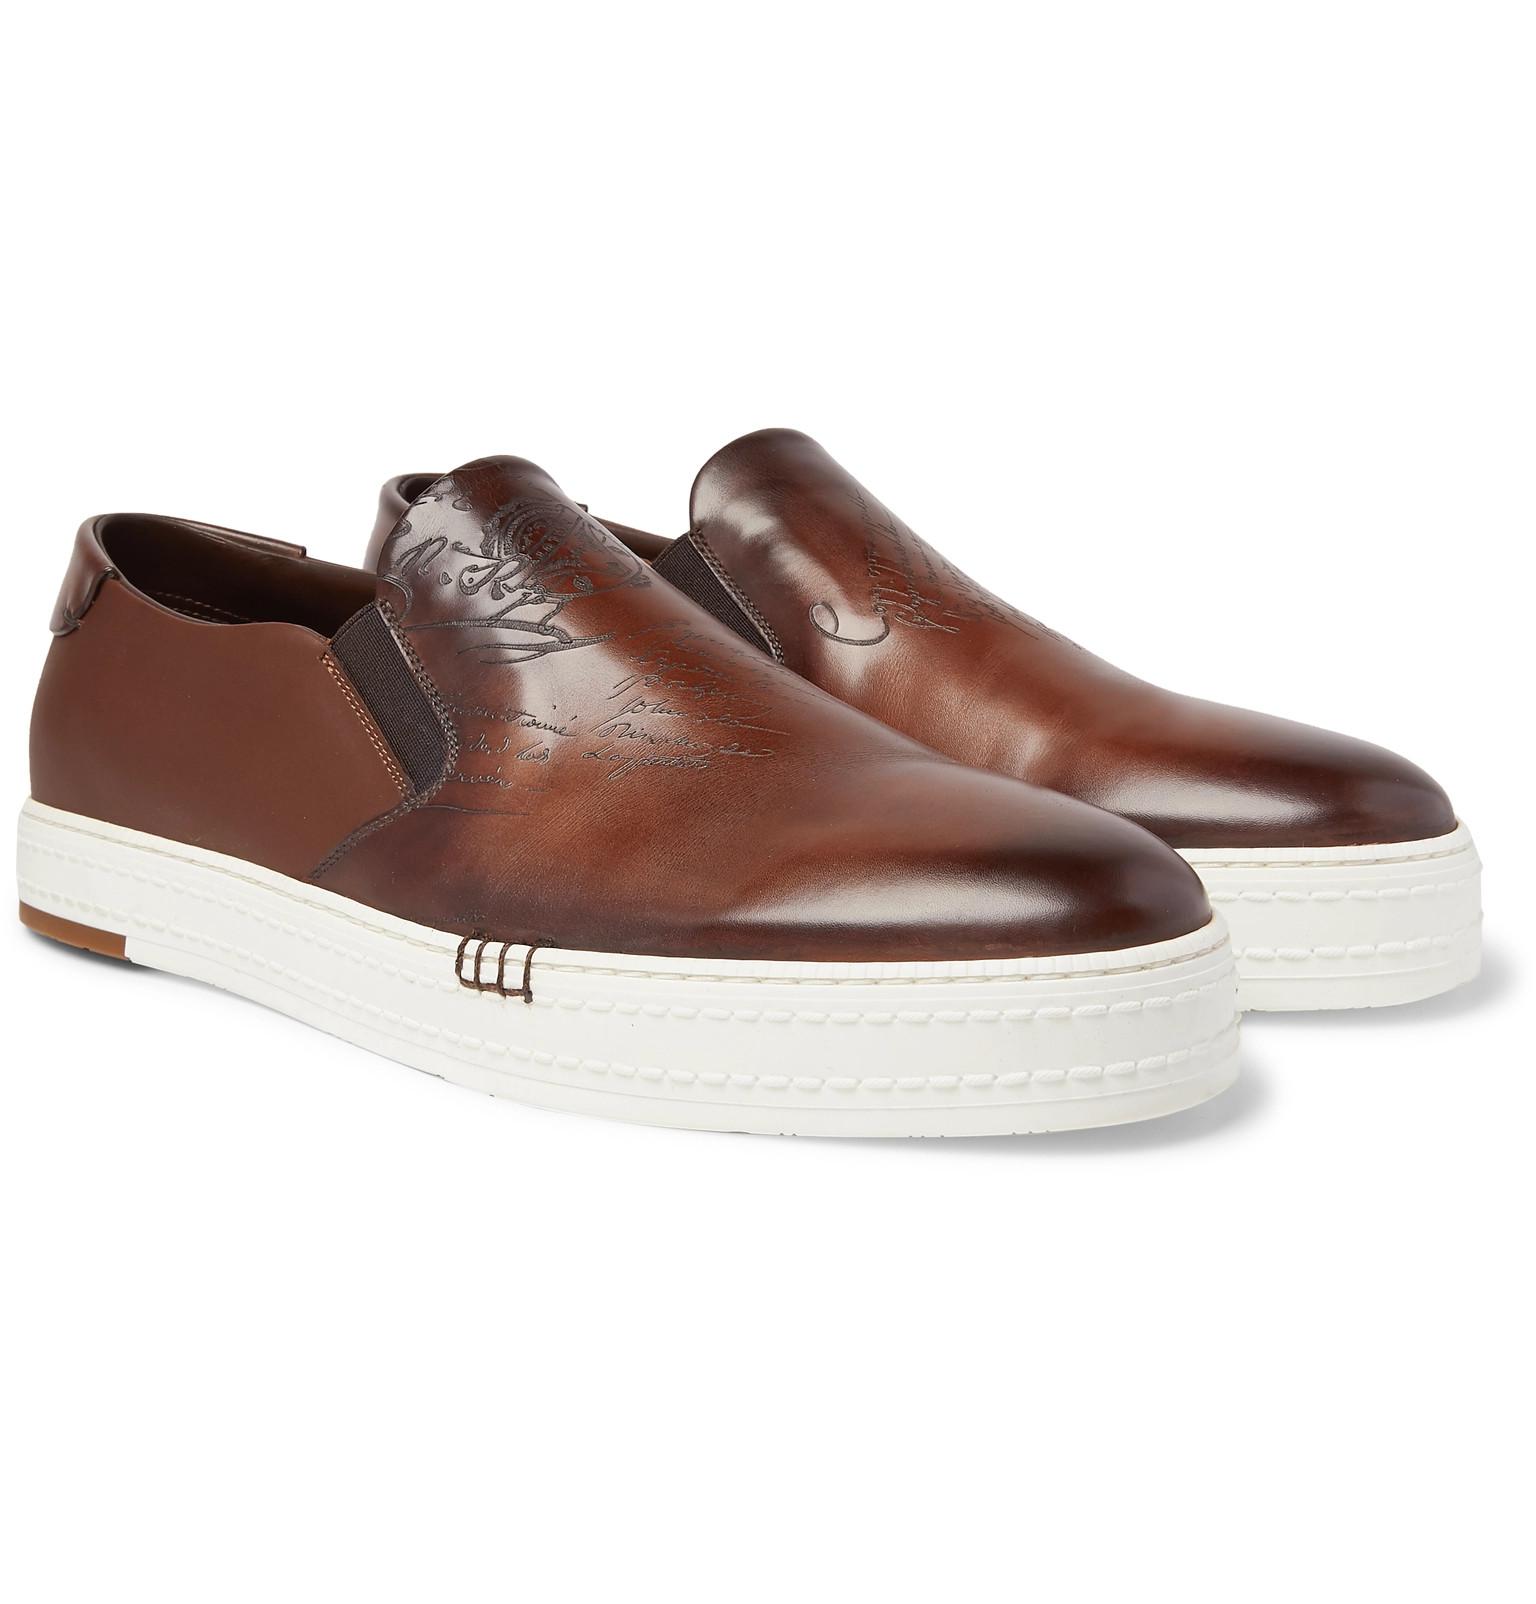 Berluti Playtime Scritto Leather Slip-on Sneakers in Brown for Men